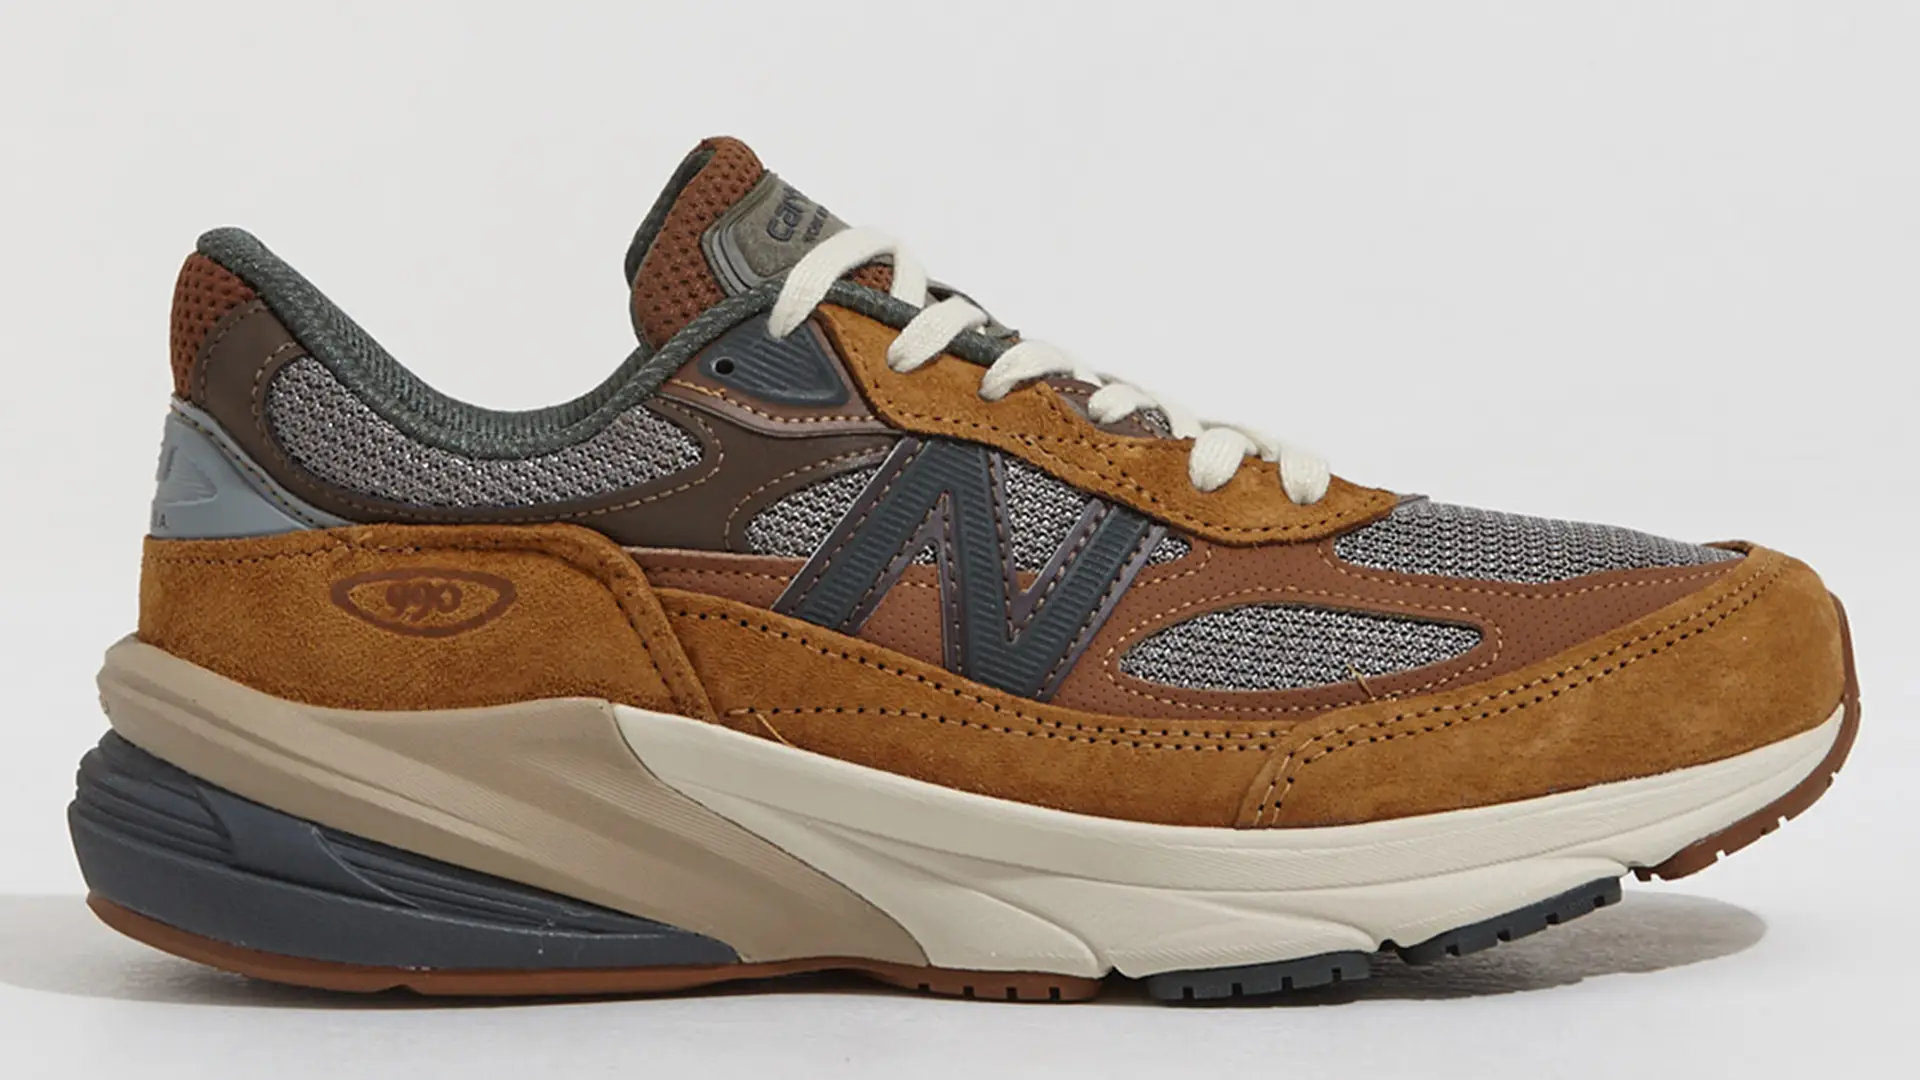 The Carhartt WIP x New Balance 990v6 “Sculpture Centre” is For Working (Out) In